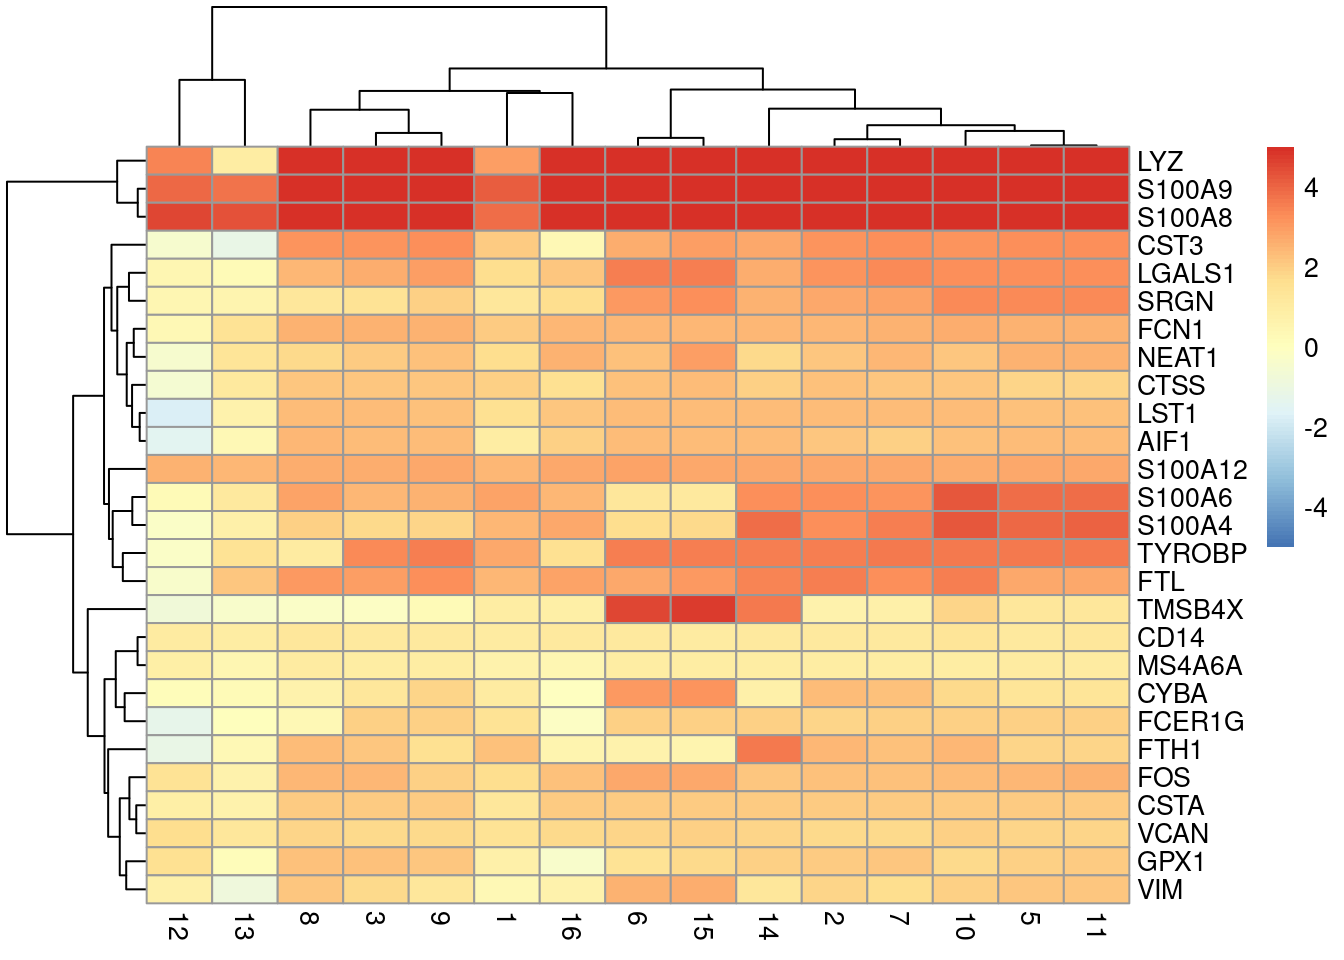 Heatmap of log~2~-fold changes for the top marker genes (rows) of cluster 4 compared to all other clusters (columns).